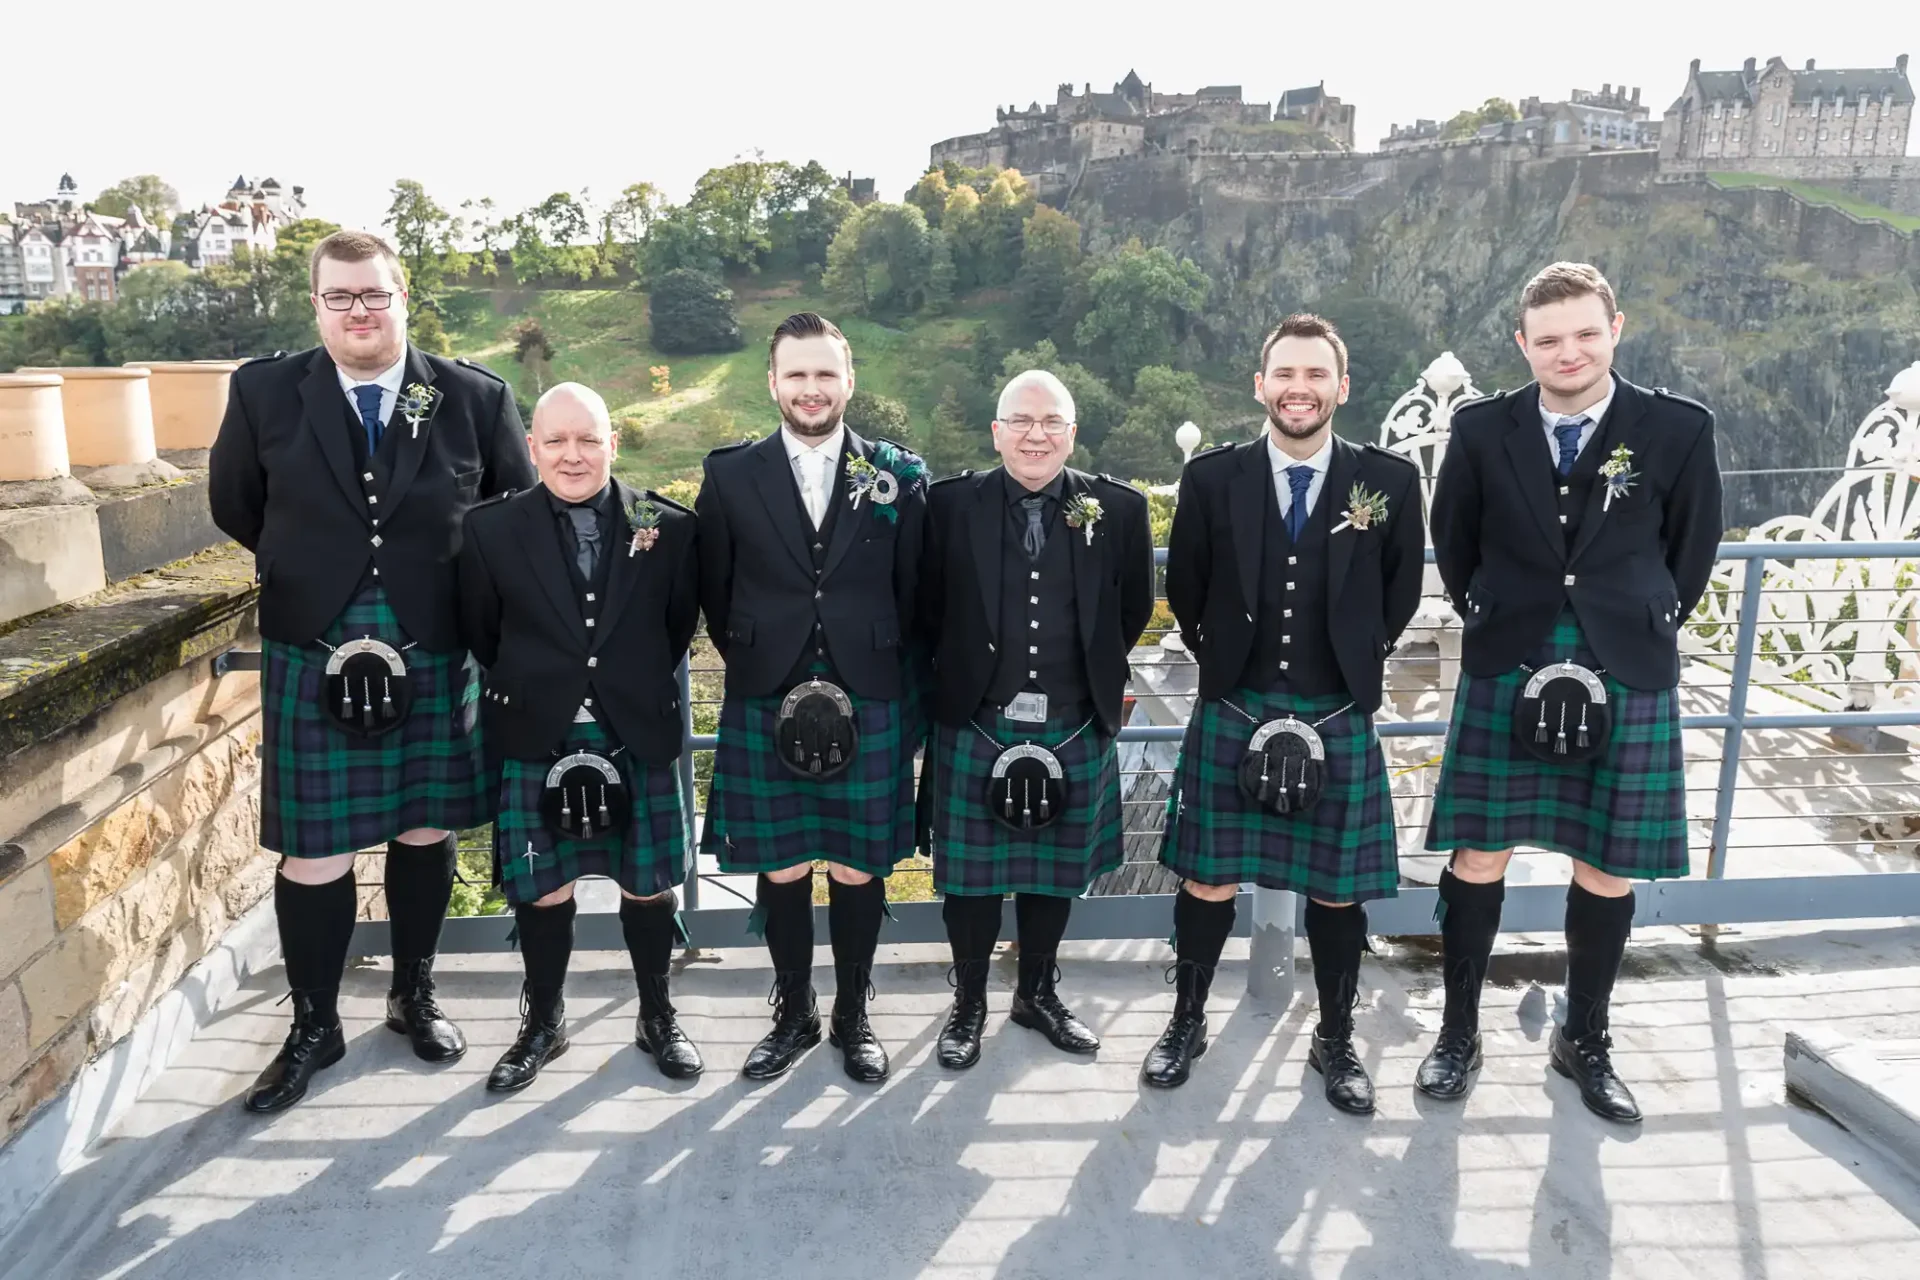 Seven men in traditional scottish kilts standing on a terrace with edinburgh castle in the background.